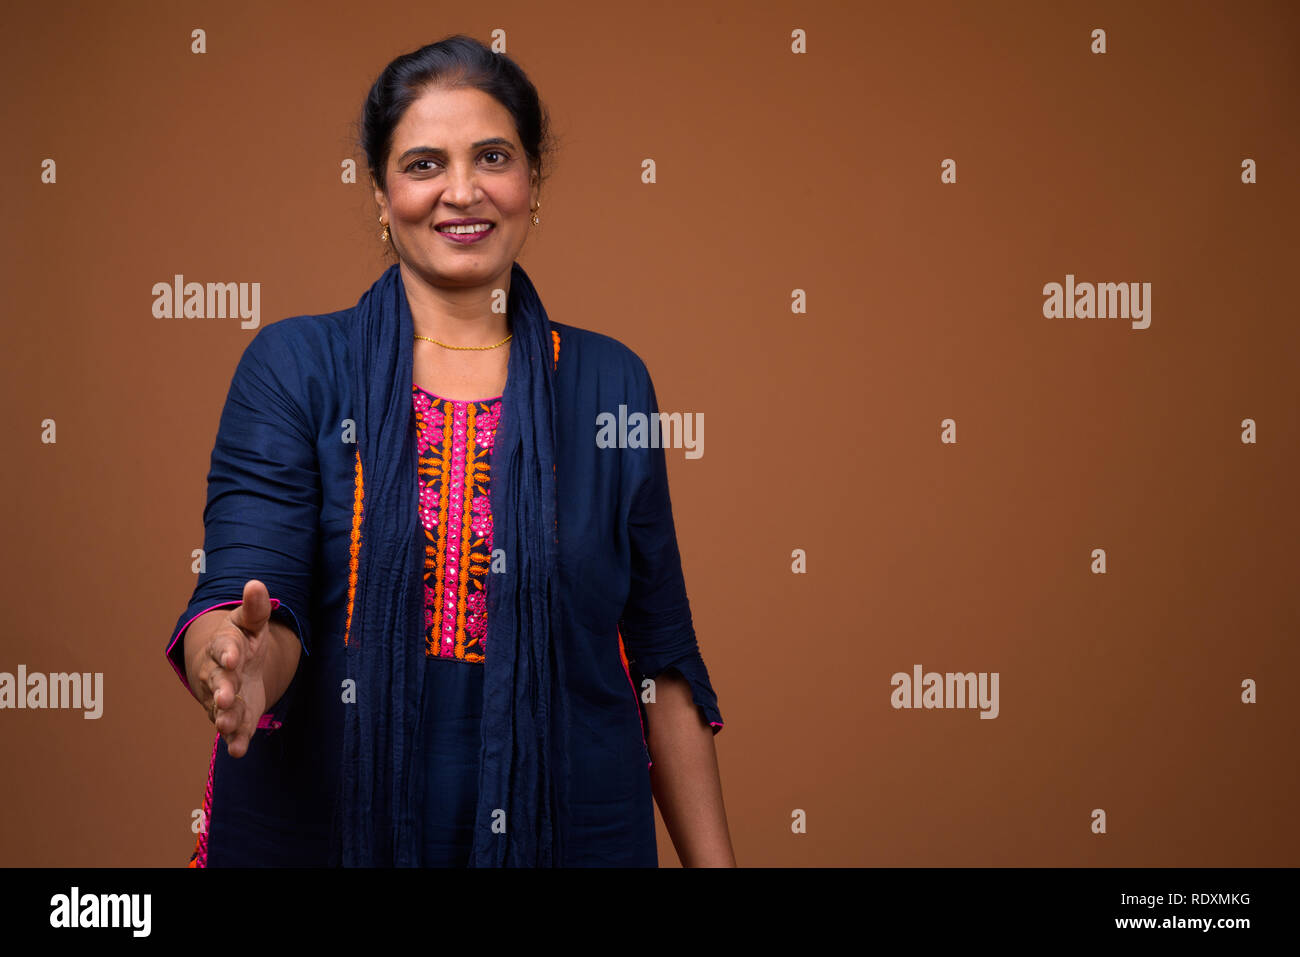 Mature happy Indian woman giving handshake for agreement Stock Photo